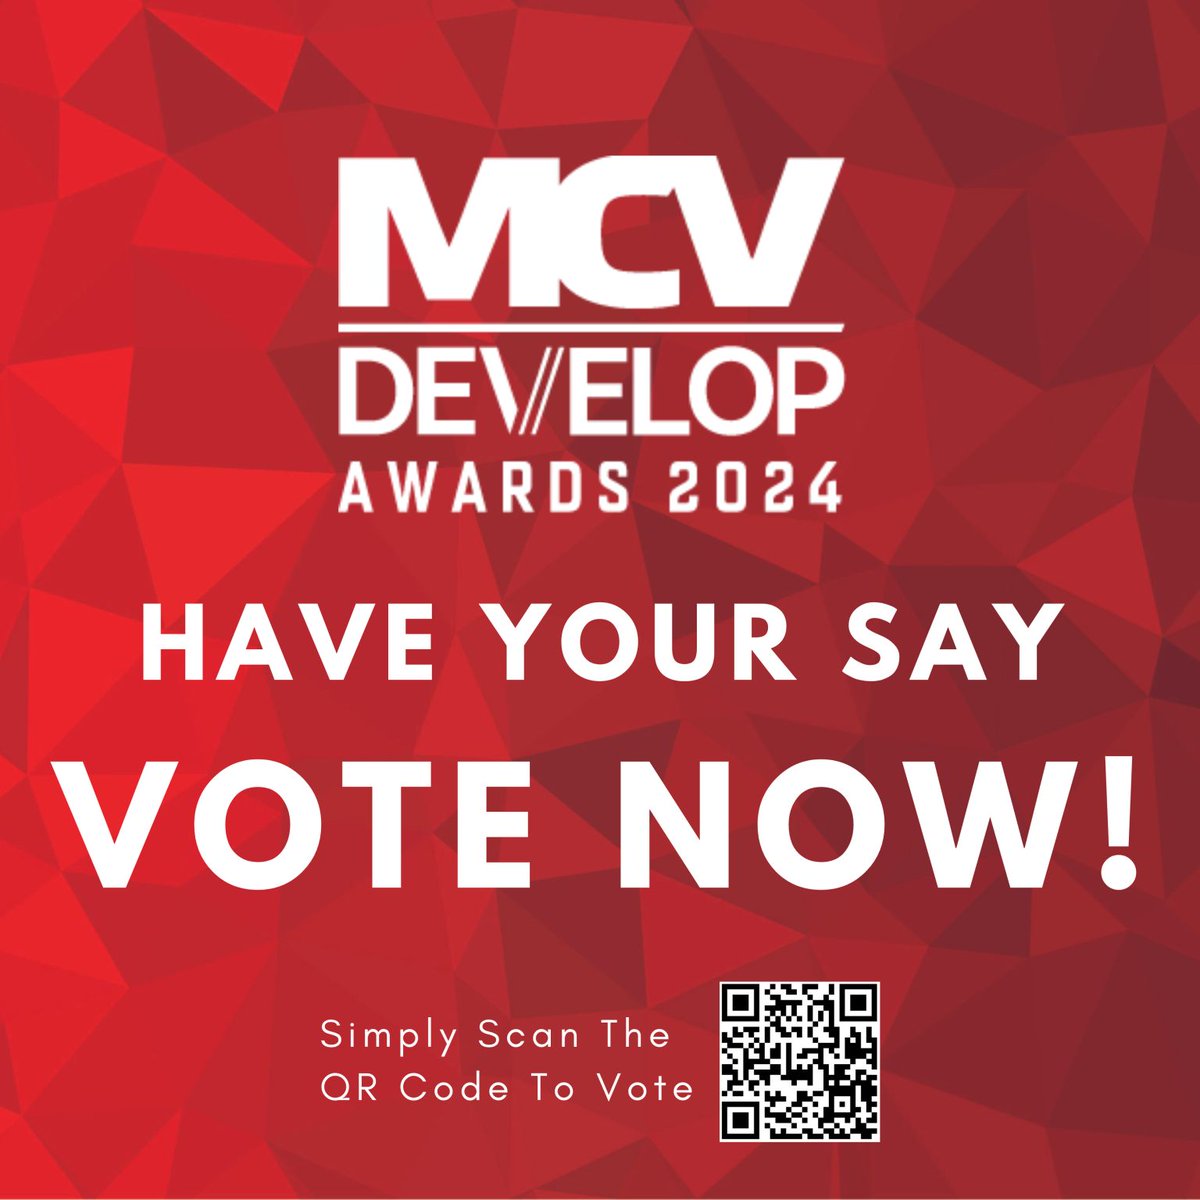 Voting for the @MCV_DEVELOP Awards closes Monday! Atomhawk is nominated for Service Partner of the Year. Your votes help recognise excellence and innovation across the UK games industry. Vote now: mcvdevelopawards.com/vote/ Good luck to all the other amazing nominees! 👏